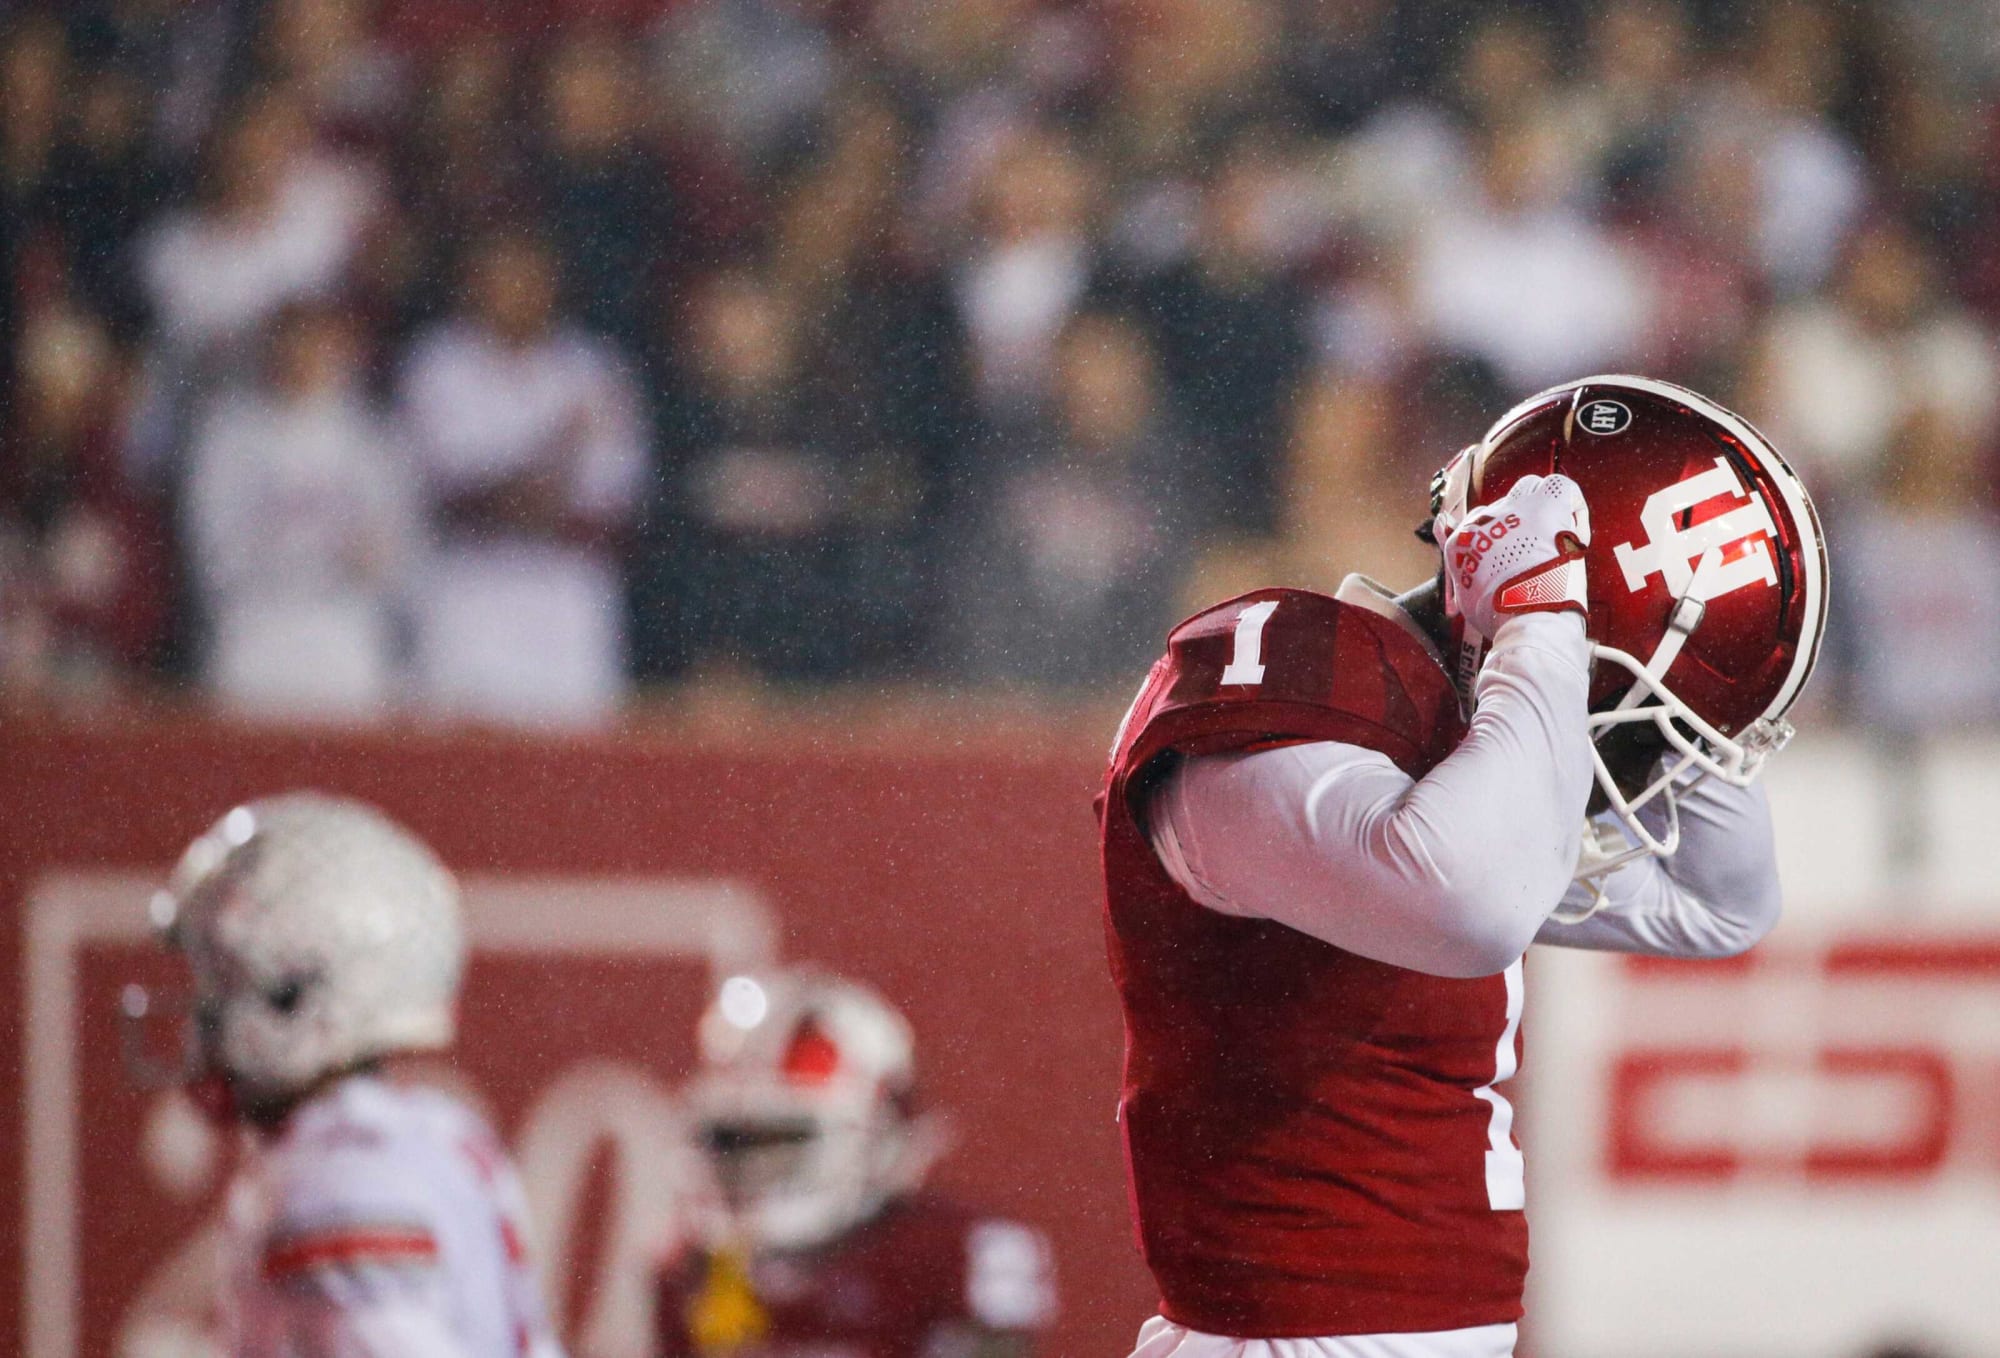 Indiana football vs. No. 2 Ohio State Can the Hoosiers shock the nation?